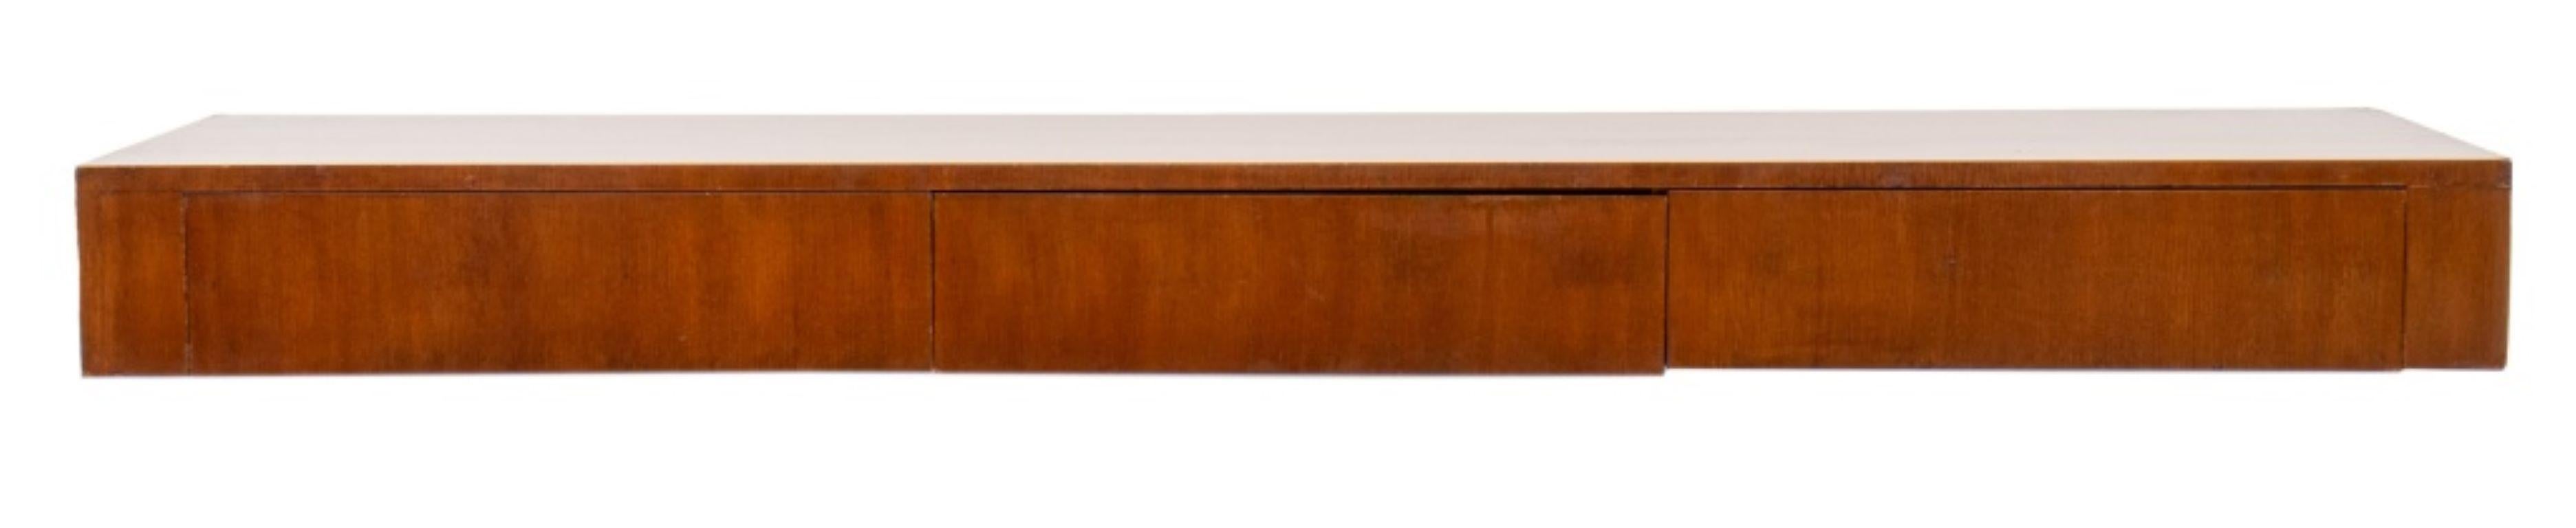 Ernst Schwadron (Austrian/American, 1896-1979)  Mid-Century Modern Mahogany Veneered Wall-Mounted Console Table, 1940s, the shaped rectangular console with incurved front and three flush drawers, opening to reveal fitted compartments for silver